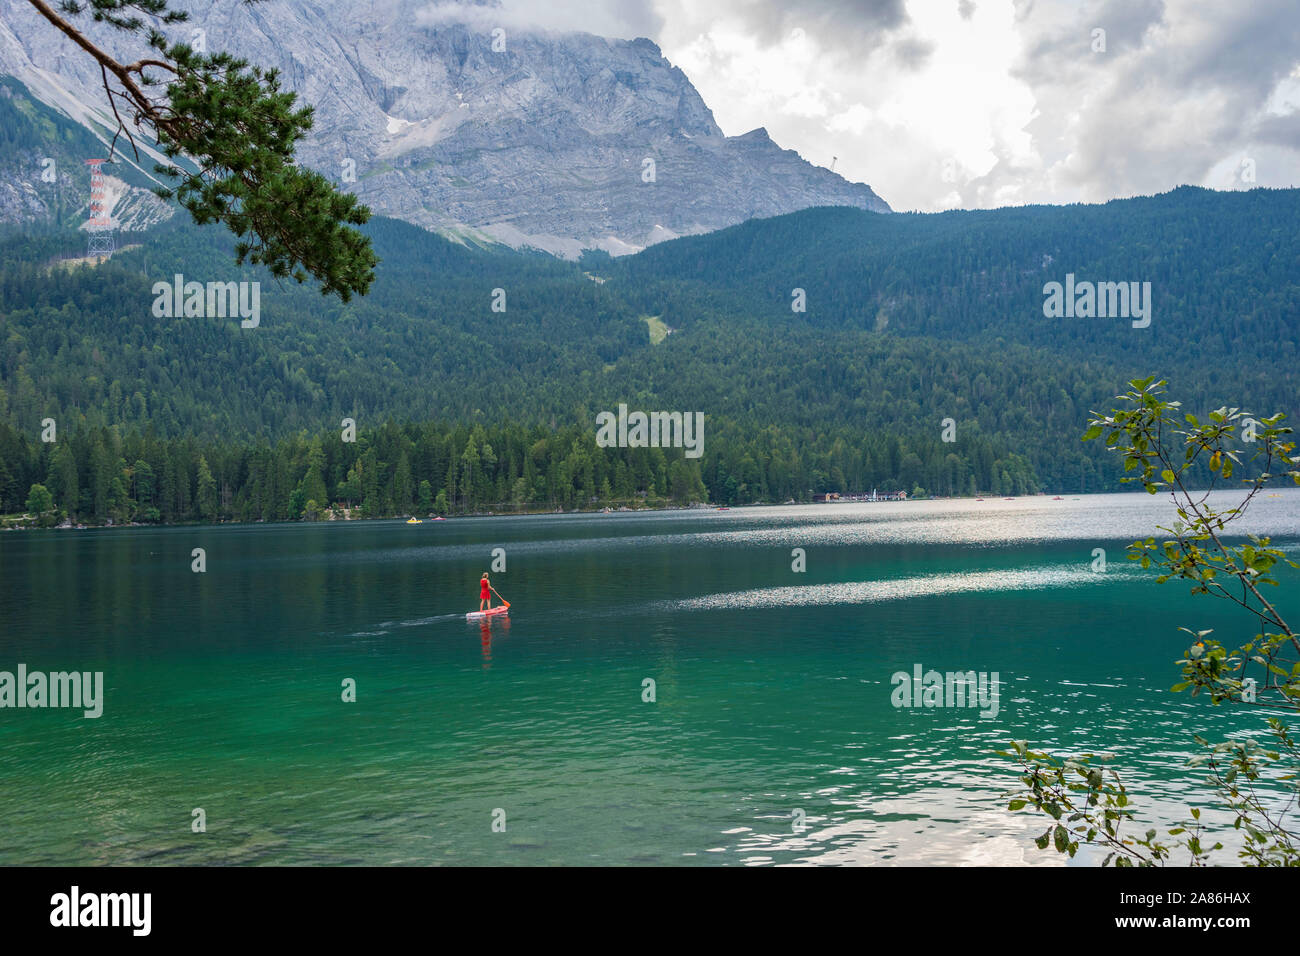 Colorful summer on the Eibsee lake in German Alps mountain. Germany, Europe. Stock Photo